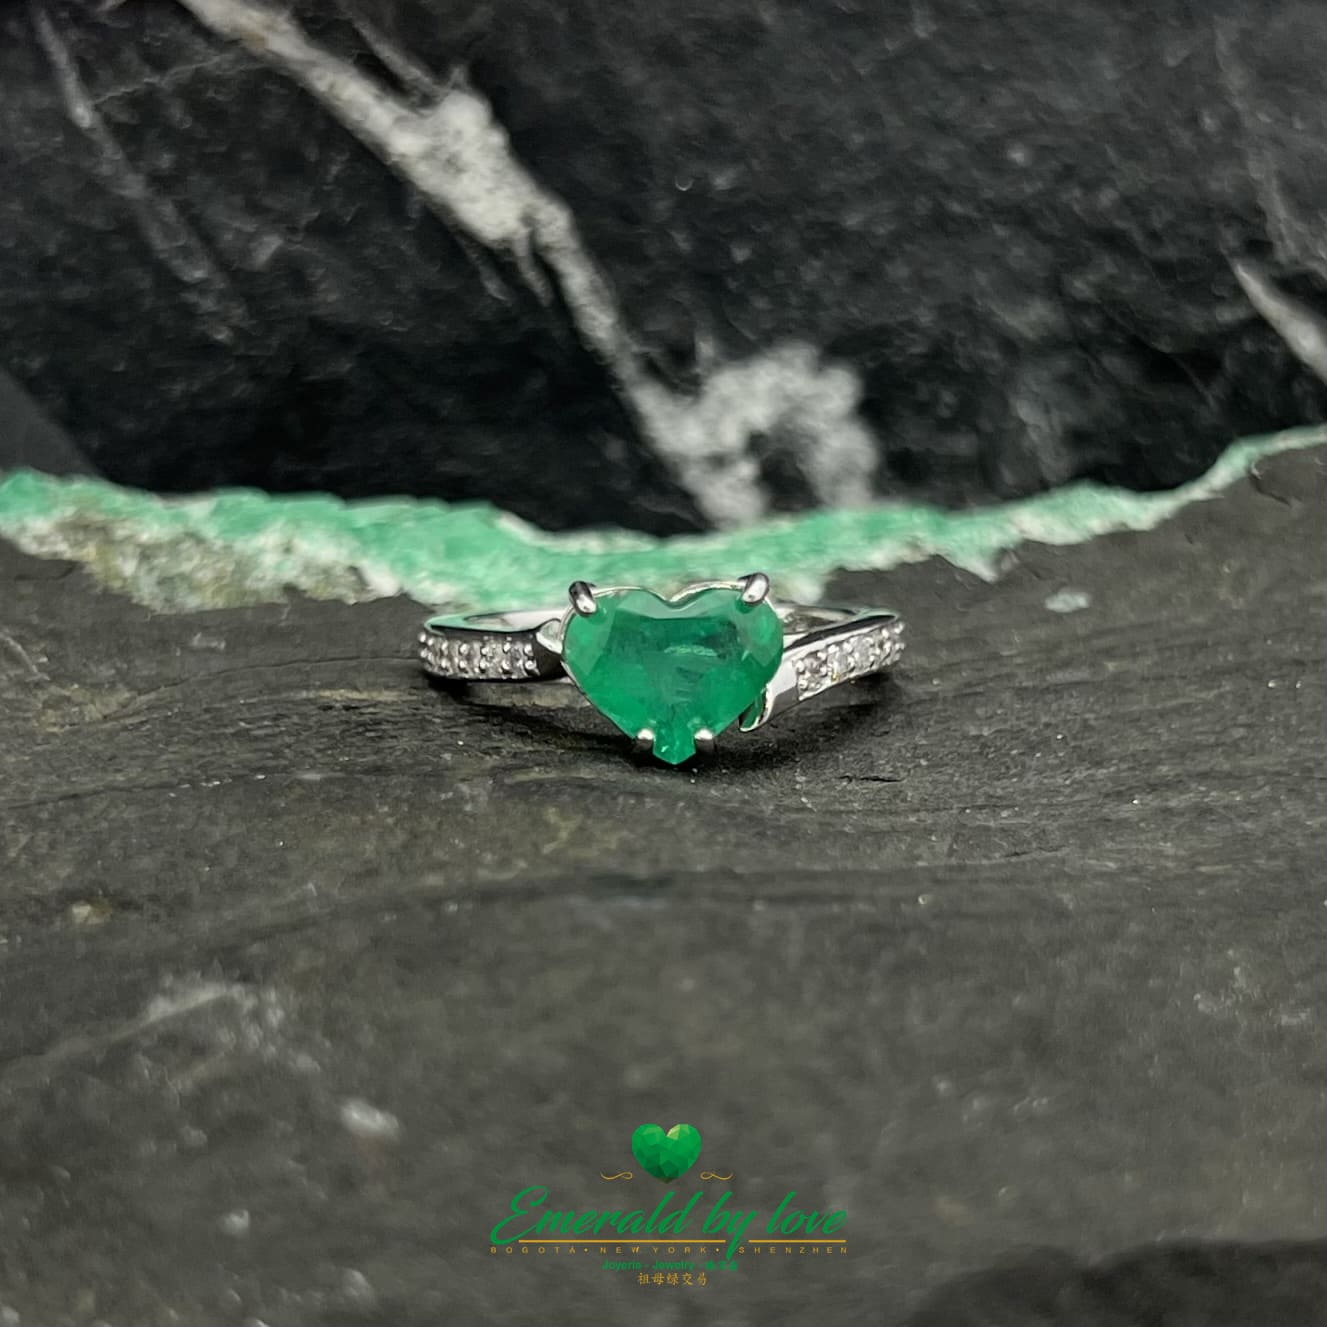 Heart-Shaped Emerald Ring with Diamond Accents in White Gold